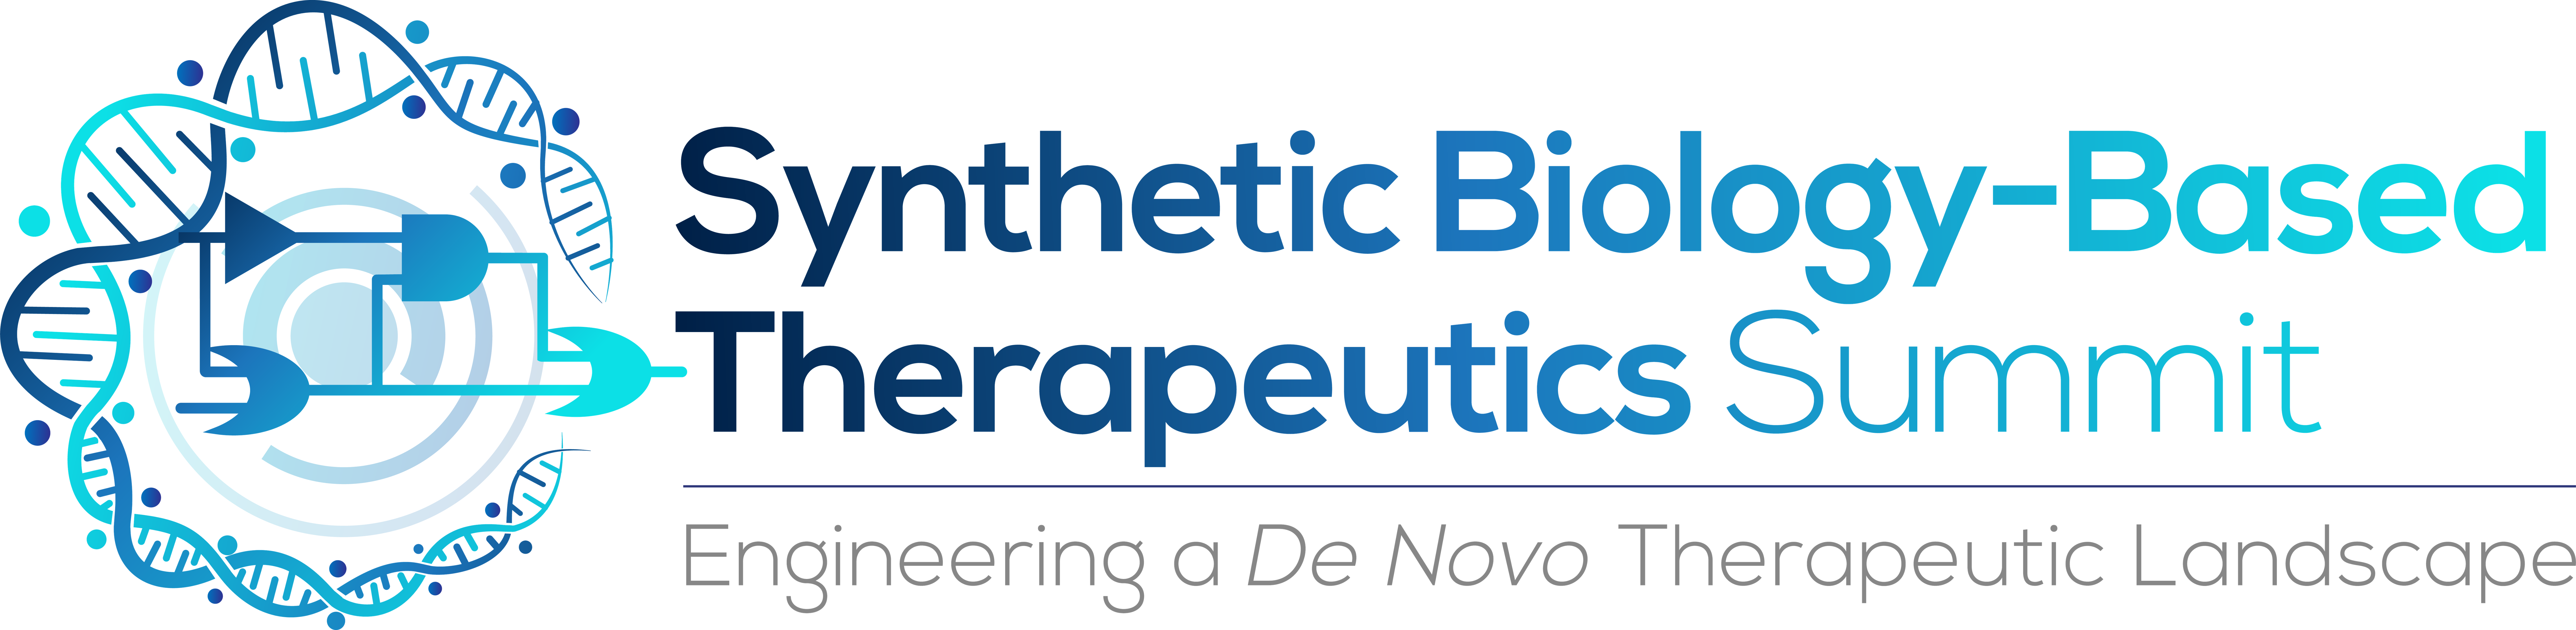 HW210722 27151 - Synthetic Biology-Based Therapeutics Summit logo FINAL